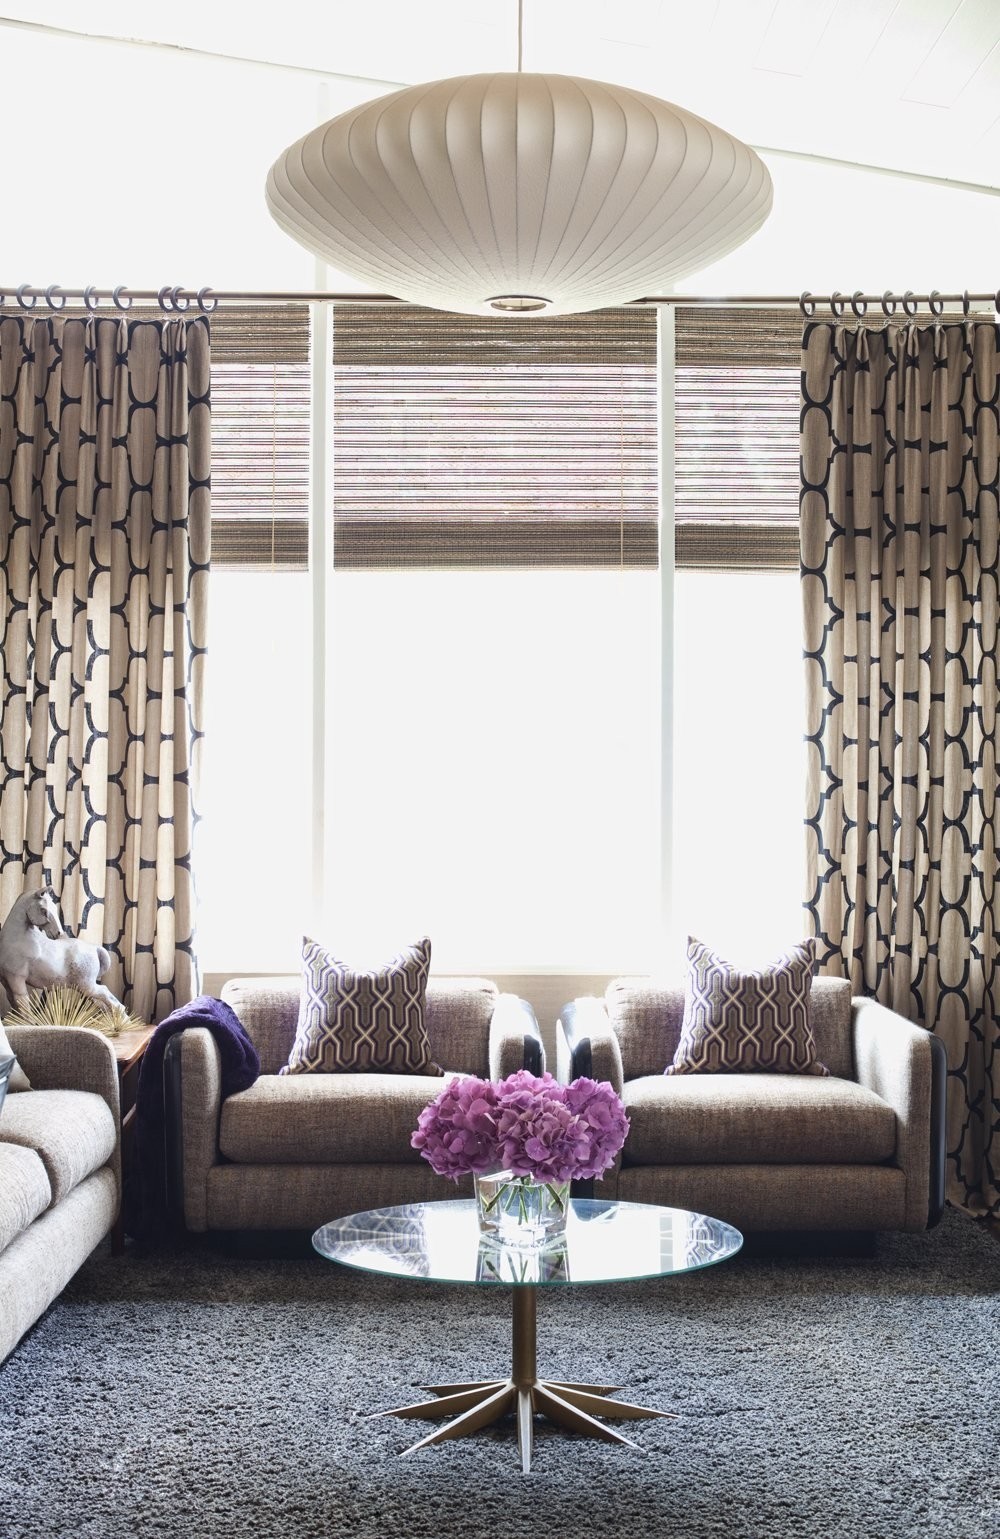 Large living room window treatment ideas with unique motives curtain